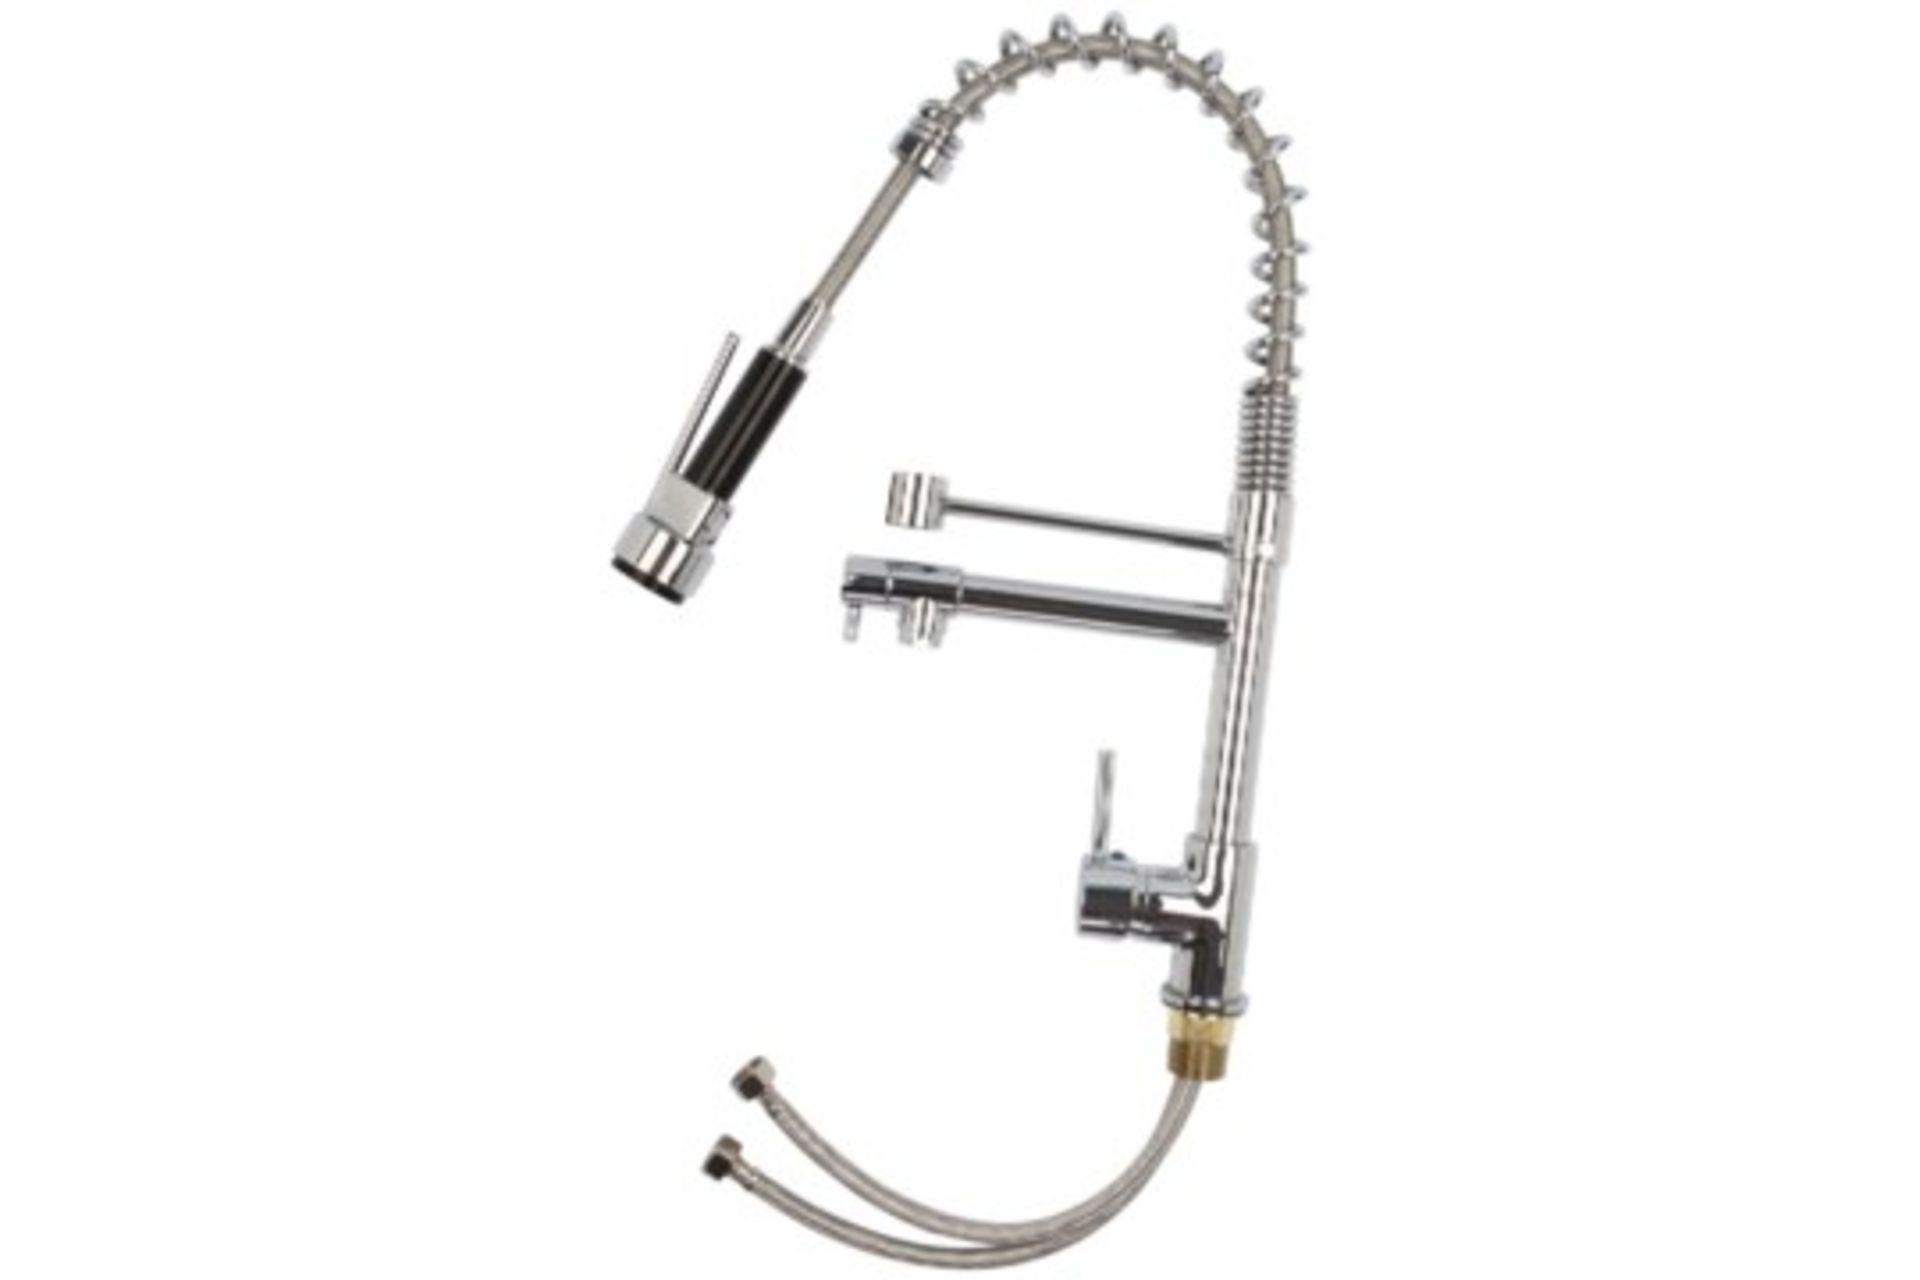 (QW222) Bentley Modern Monobloc Chrome Brass Pull Out Spray Mixer Tap. RRP £349.99. This tap is from - Bild 3 aus 3